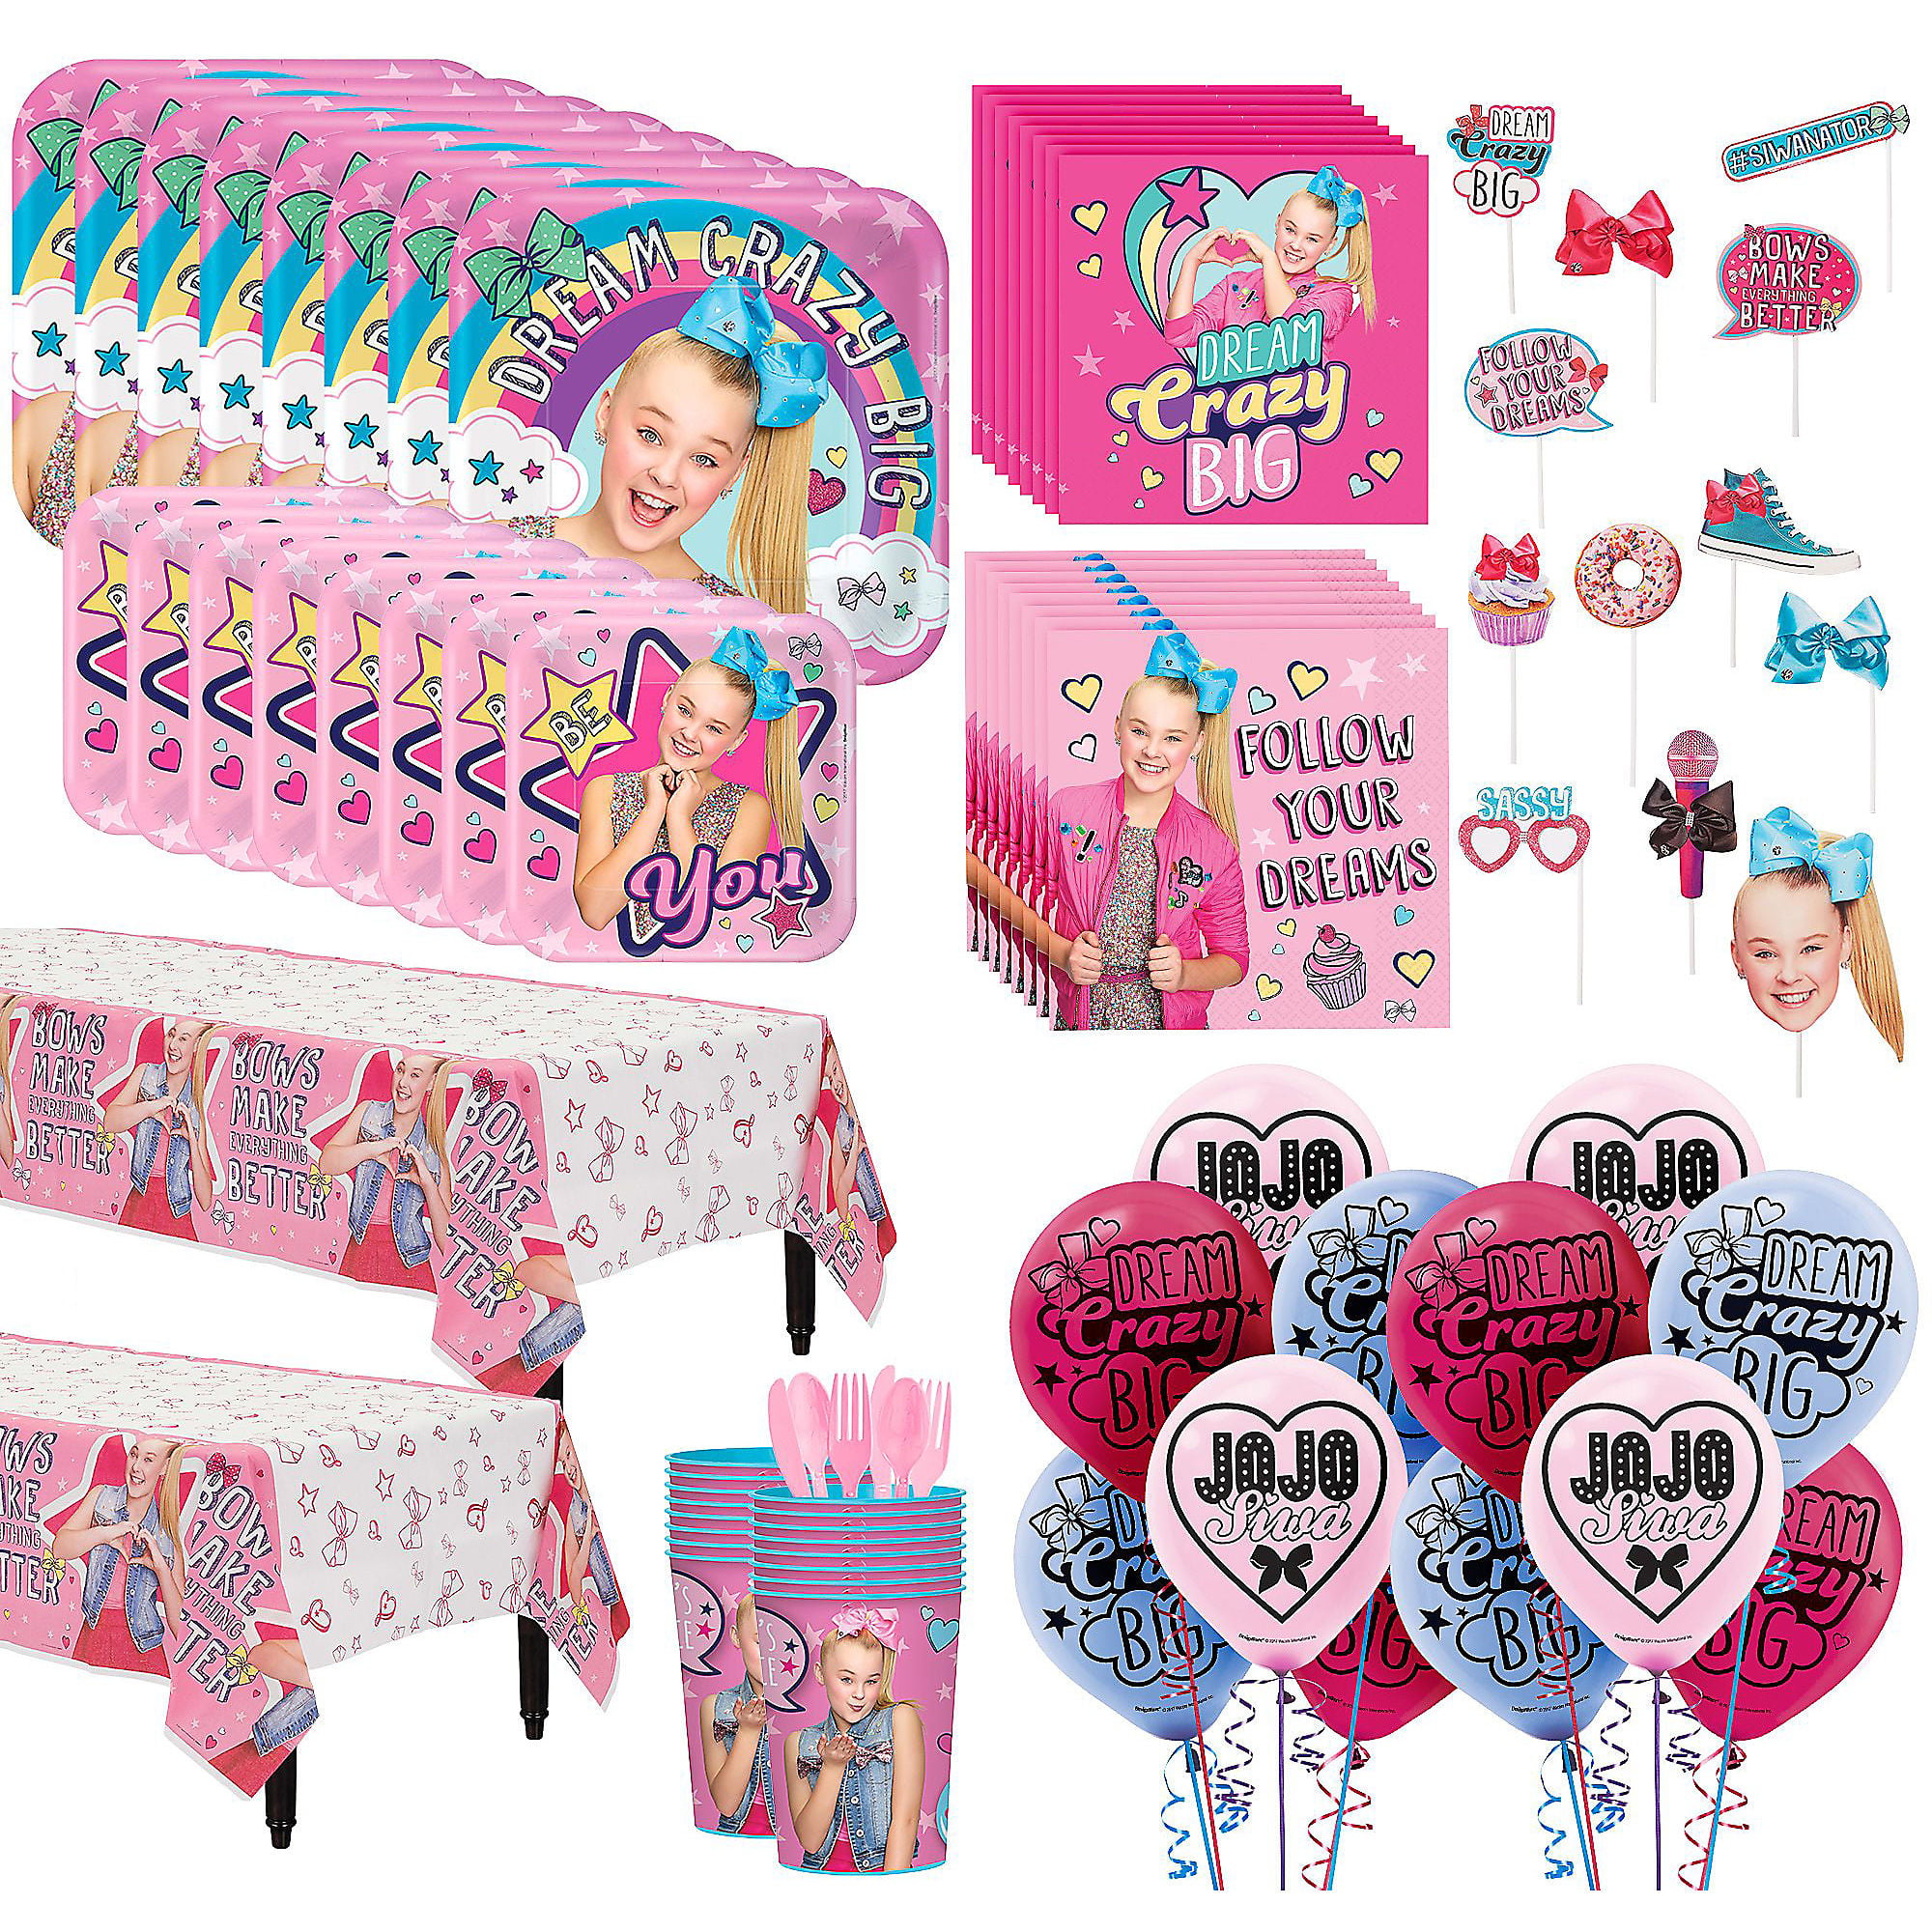 Plus Party Planning Checklist by Mikes Super Store JoJo Siwa Joelle Joanie Pink Party Supplies Bundle Pack for 16 